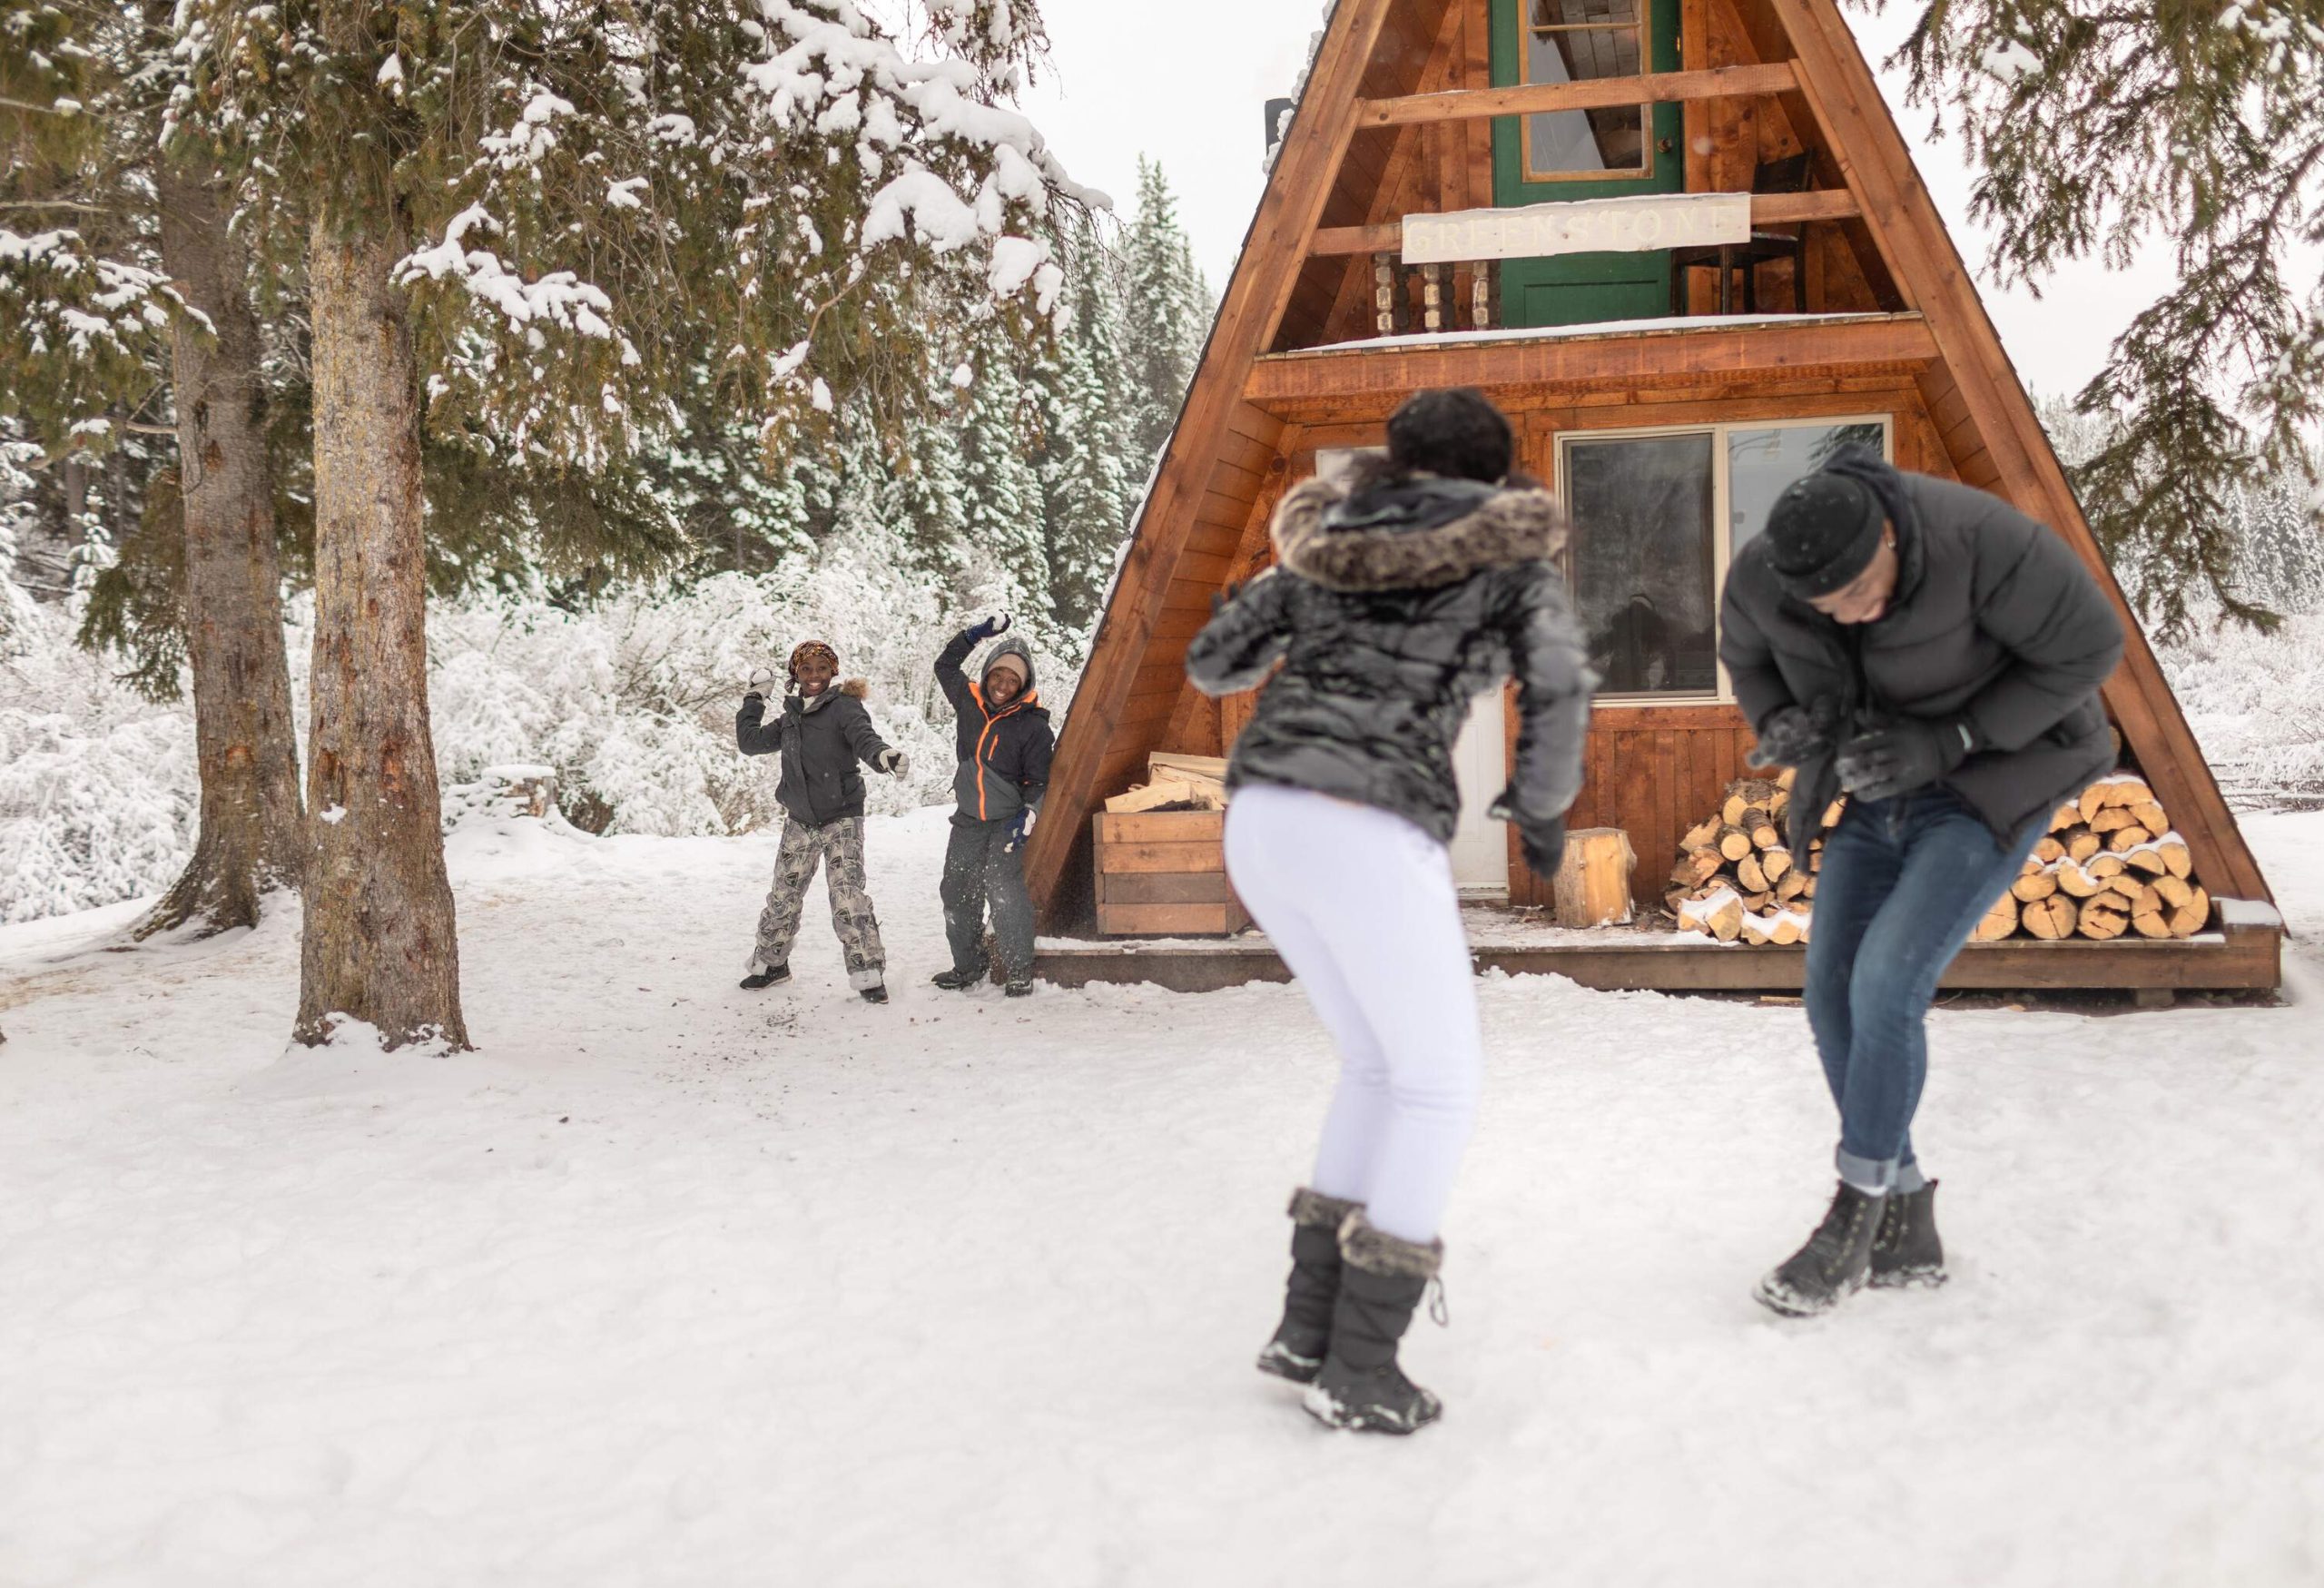 A trendy couple is caught off guard by two playful children, unleashing a flurry of snowballs outside their charming A-frame holiday cabin.